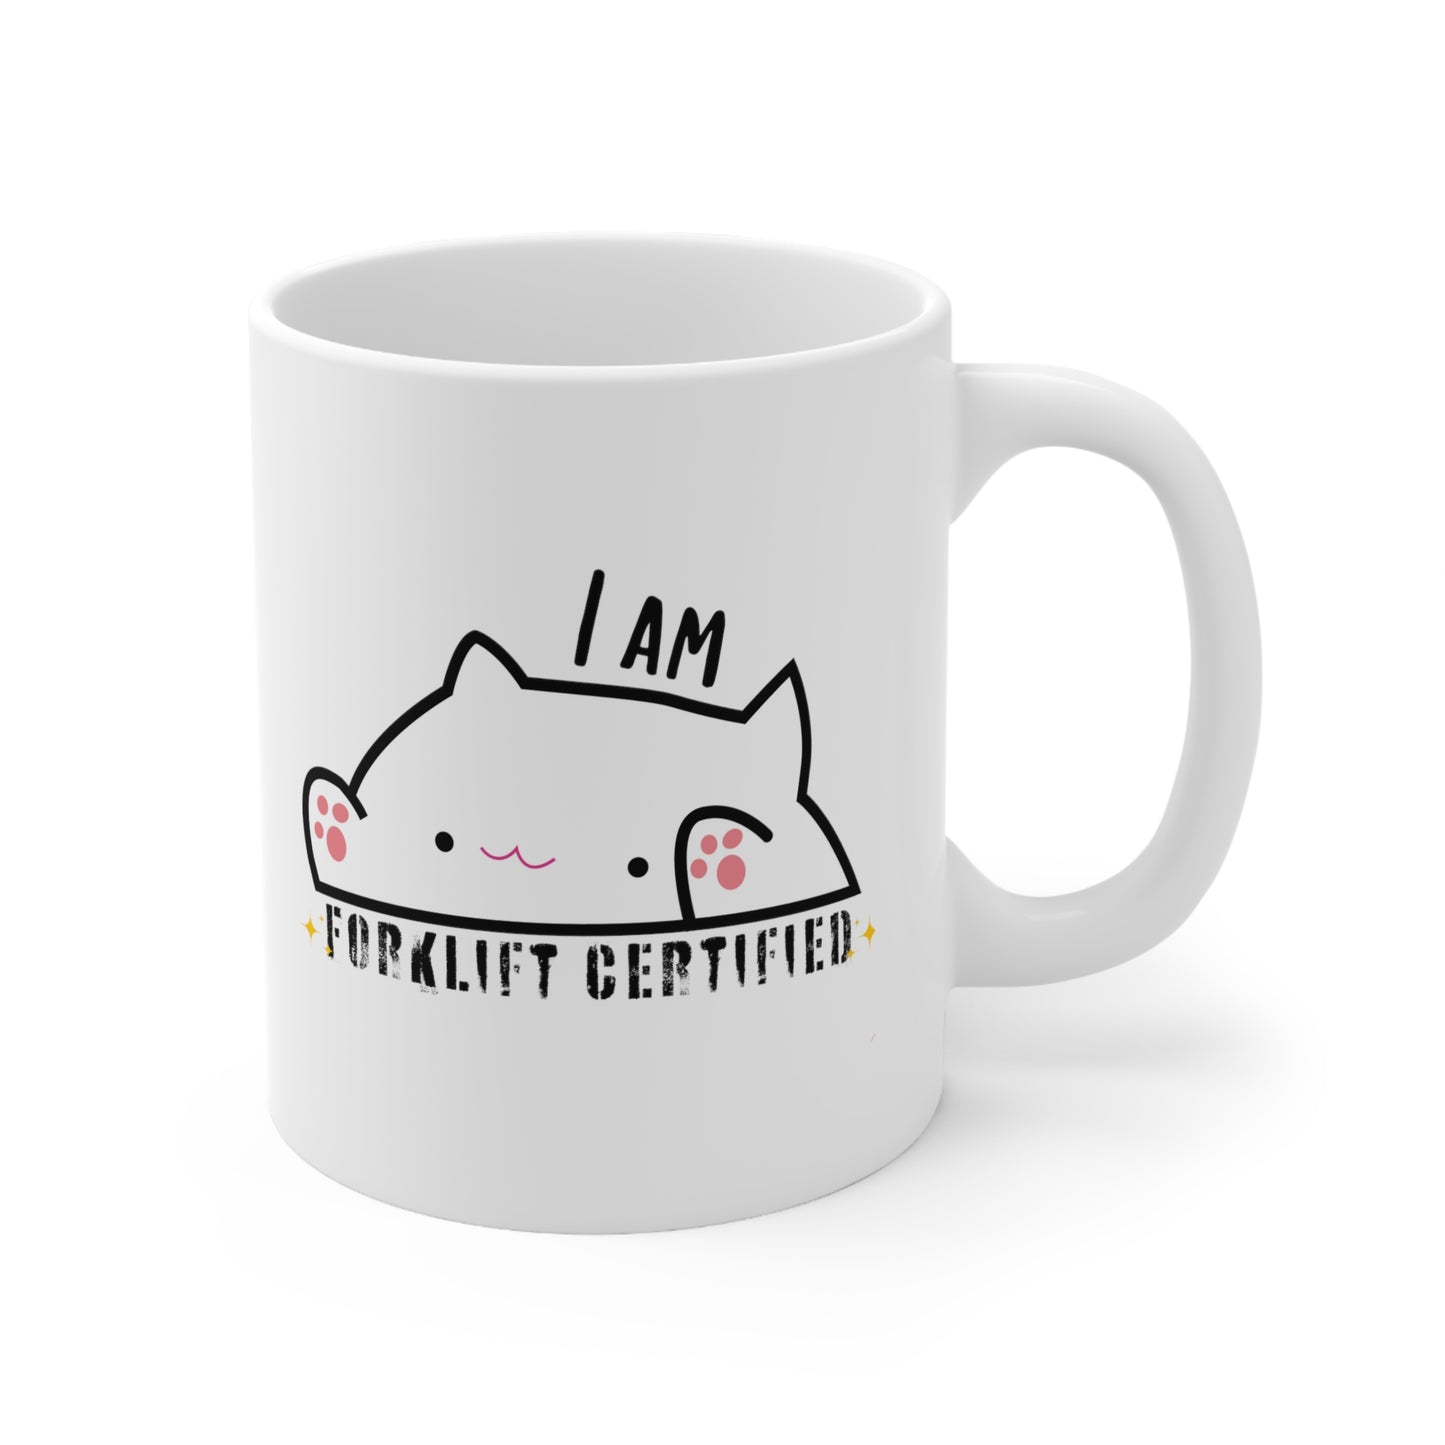 Forklift Certified Cat Ceramic Coffee Cup 11oz